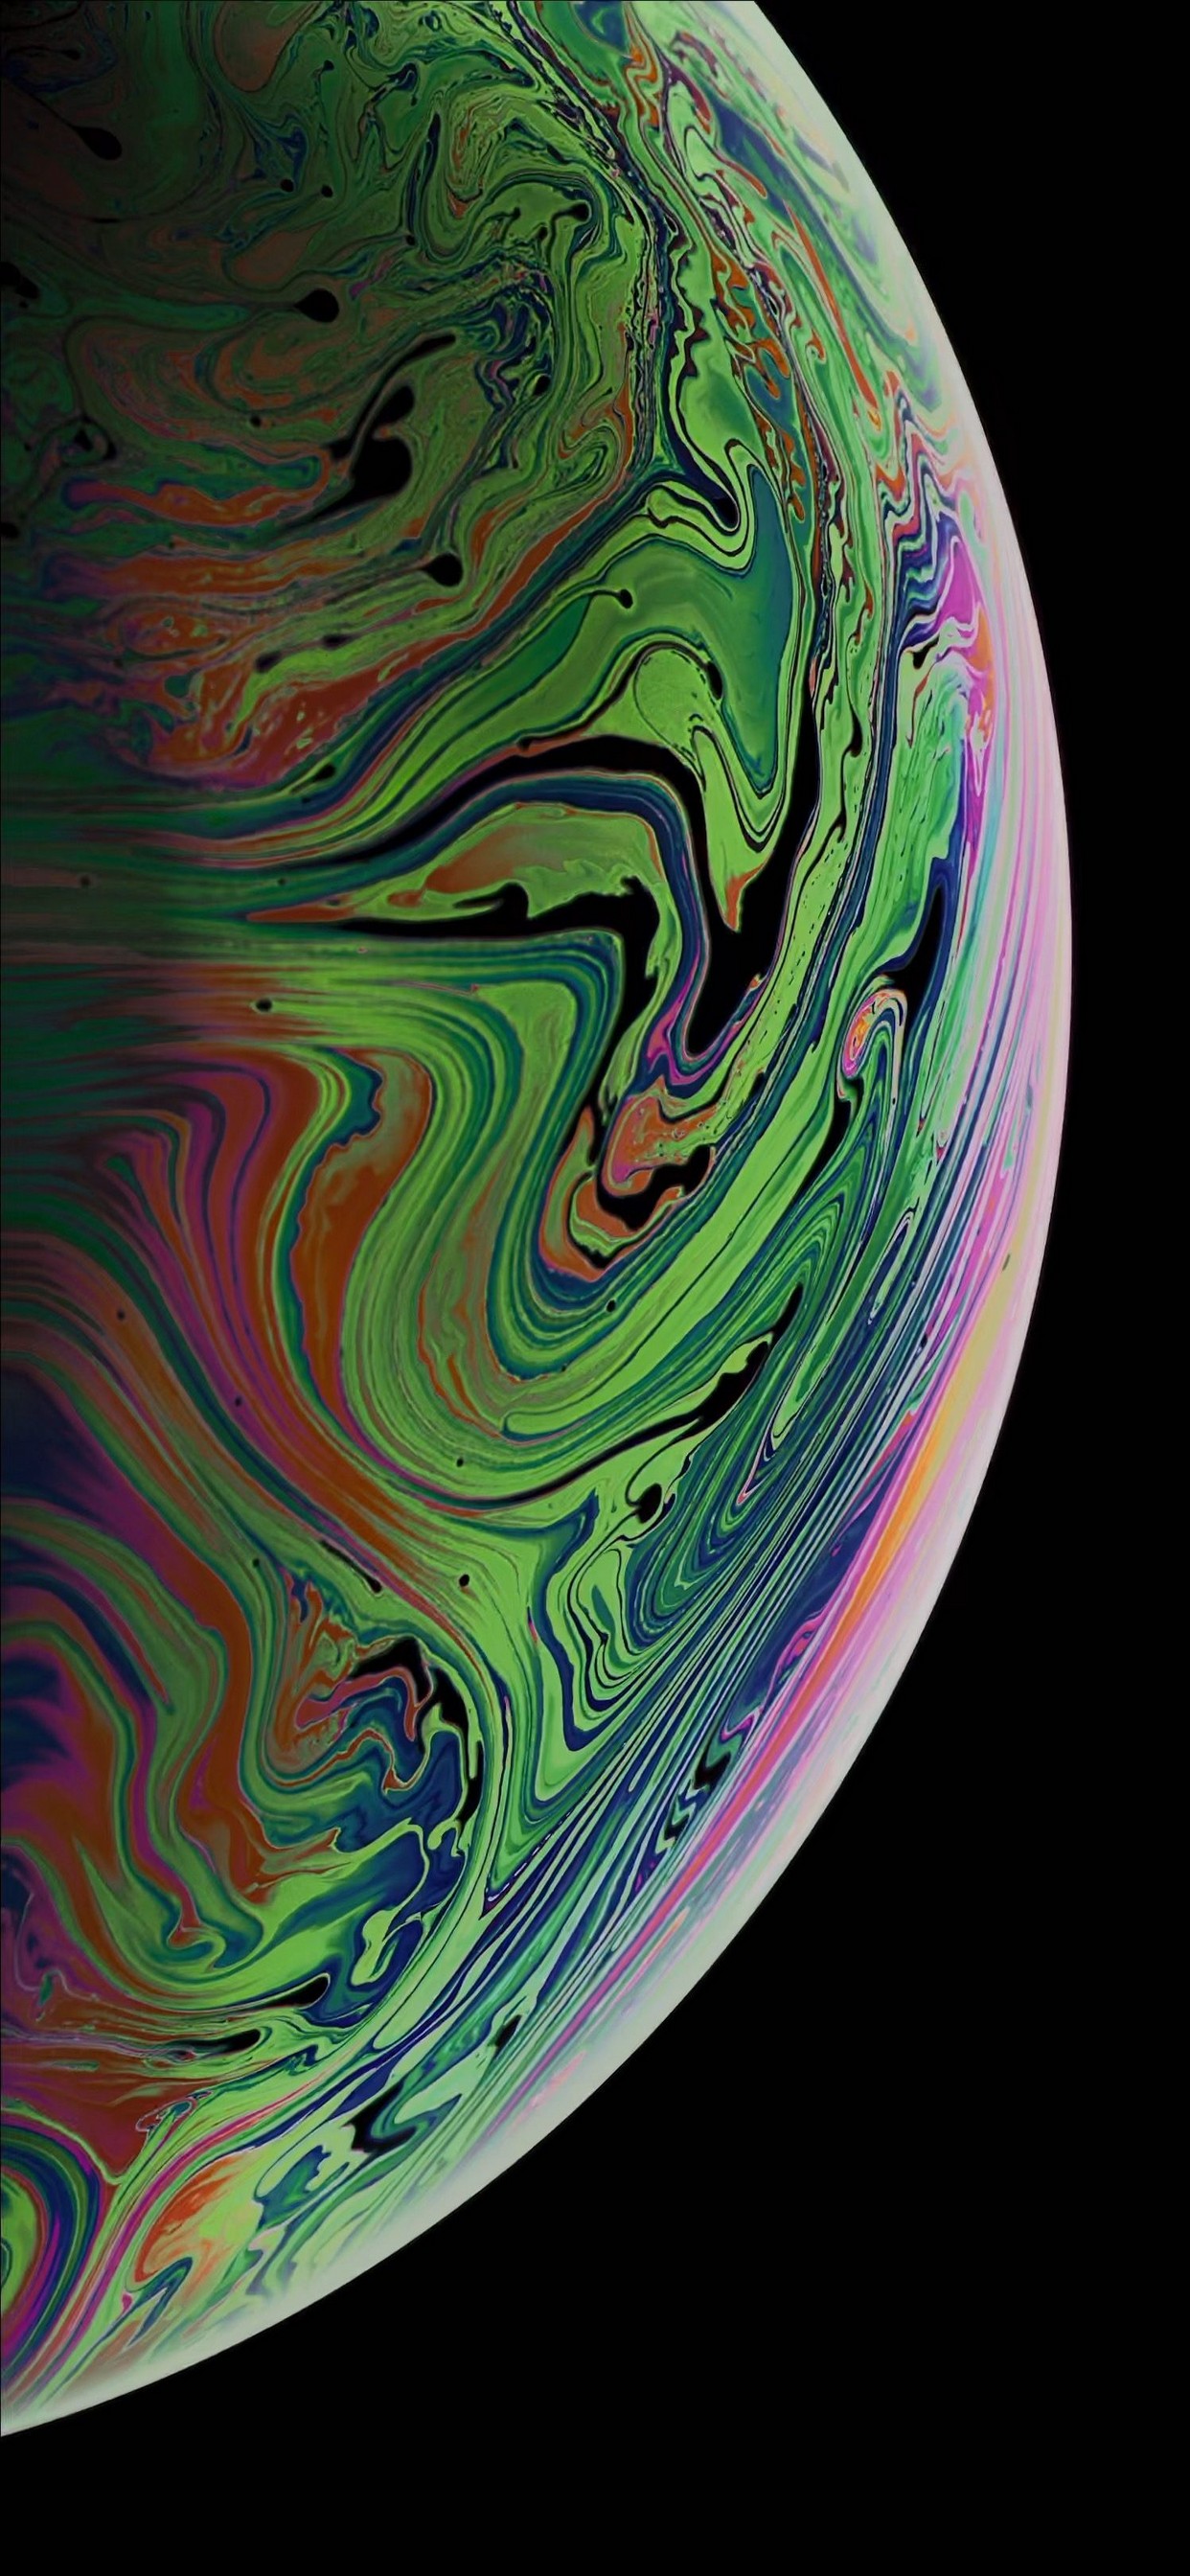 iPhone XS Max Wallpaper Design With high-resolution 1242X2688 pixel. You can set as wallpaper for Apple iPhone X, XS Max, XR, 8, 7, 6, SE, iPad. Enjoy and share your favorite HD wallpapers and background images